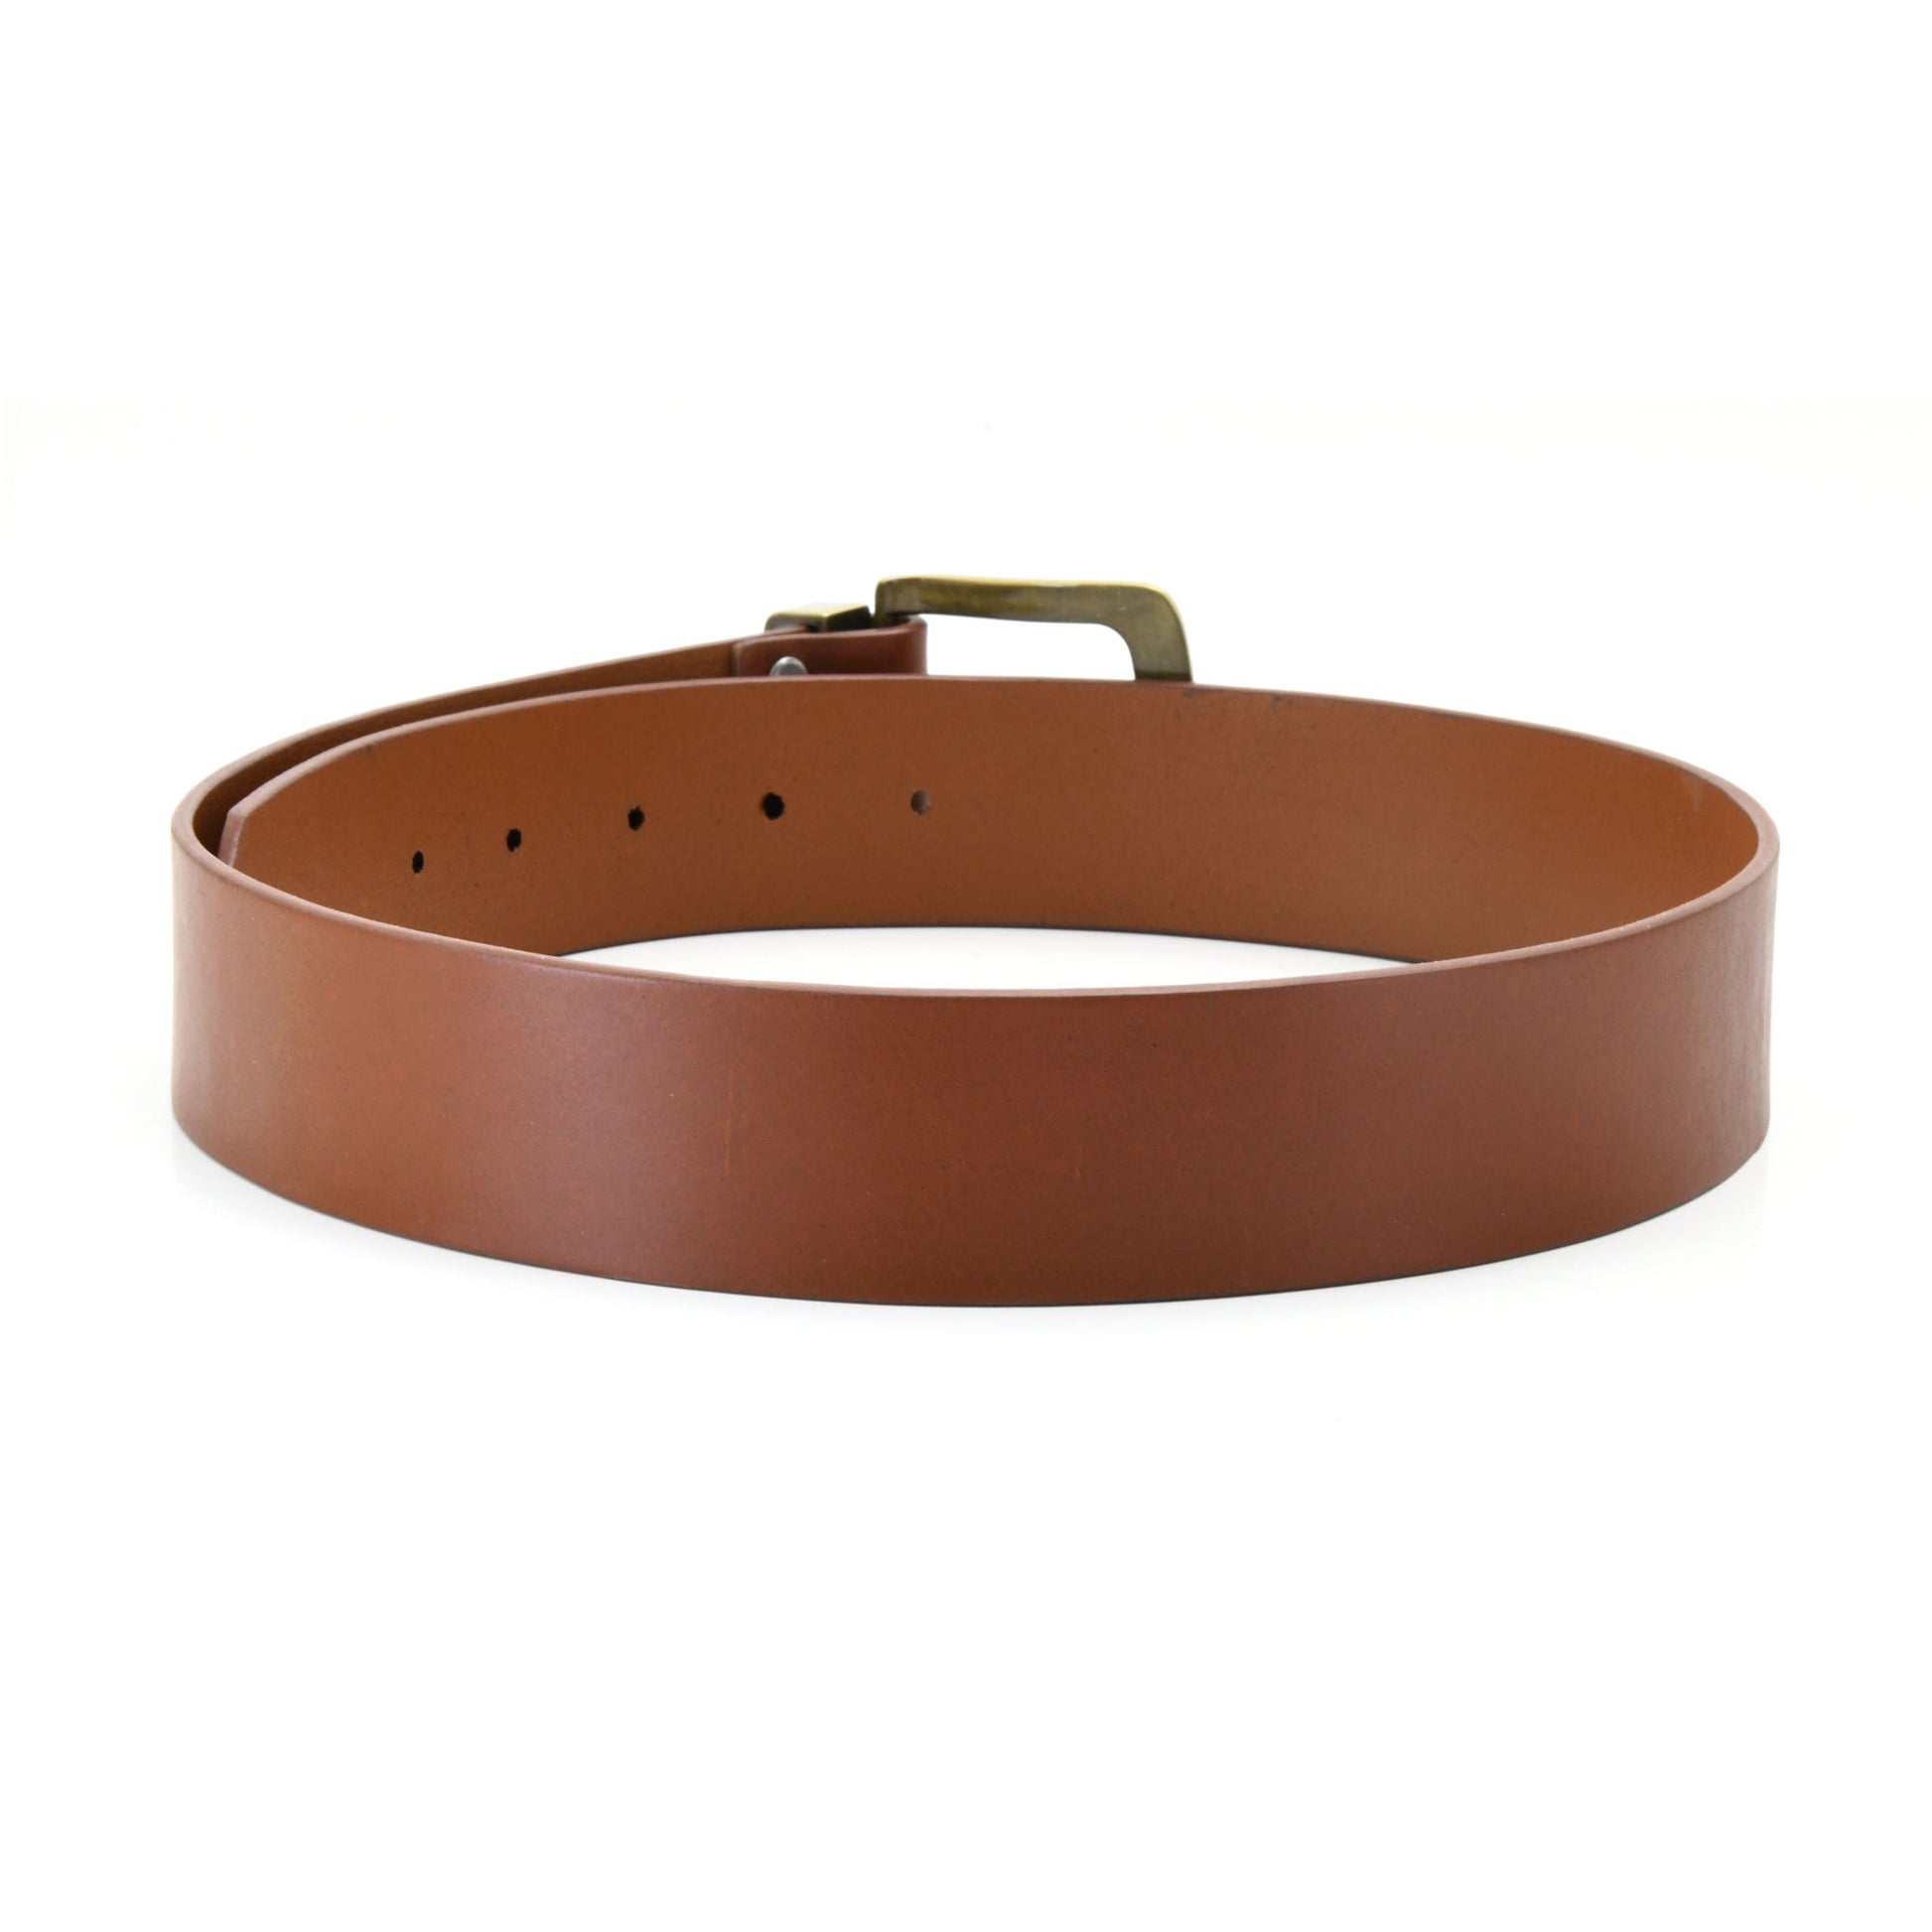 392714 - one and a half inch wide leather belt in tan color full grain leather with matte gold finish metal buckle & loop - back view